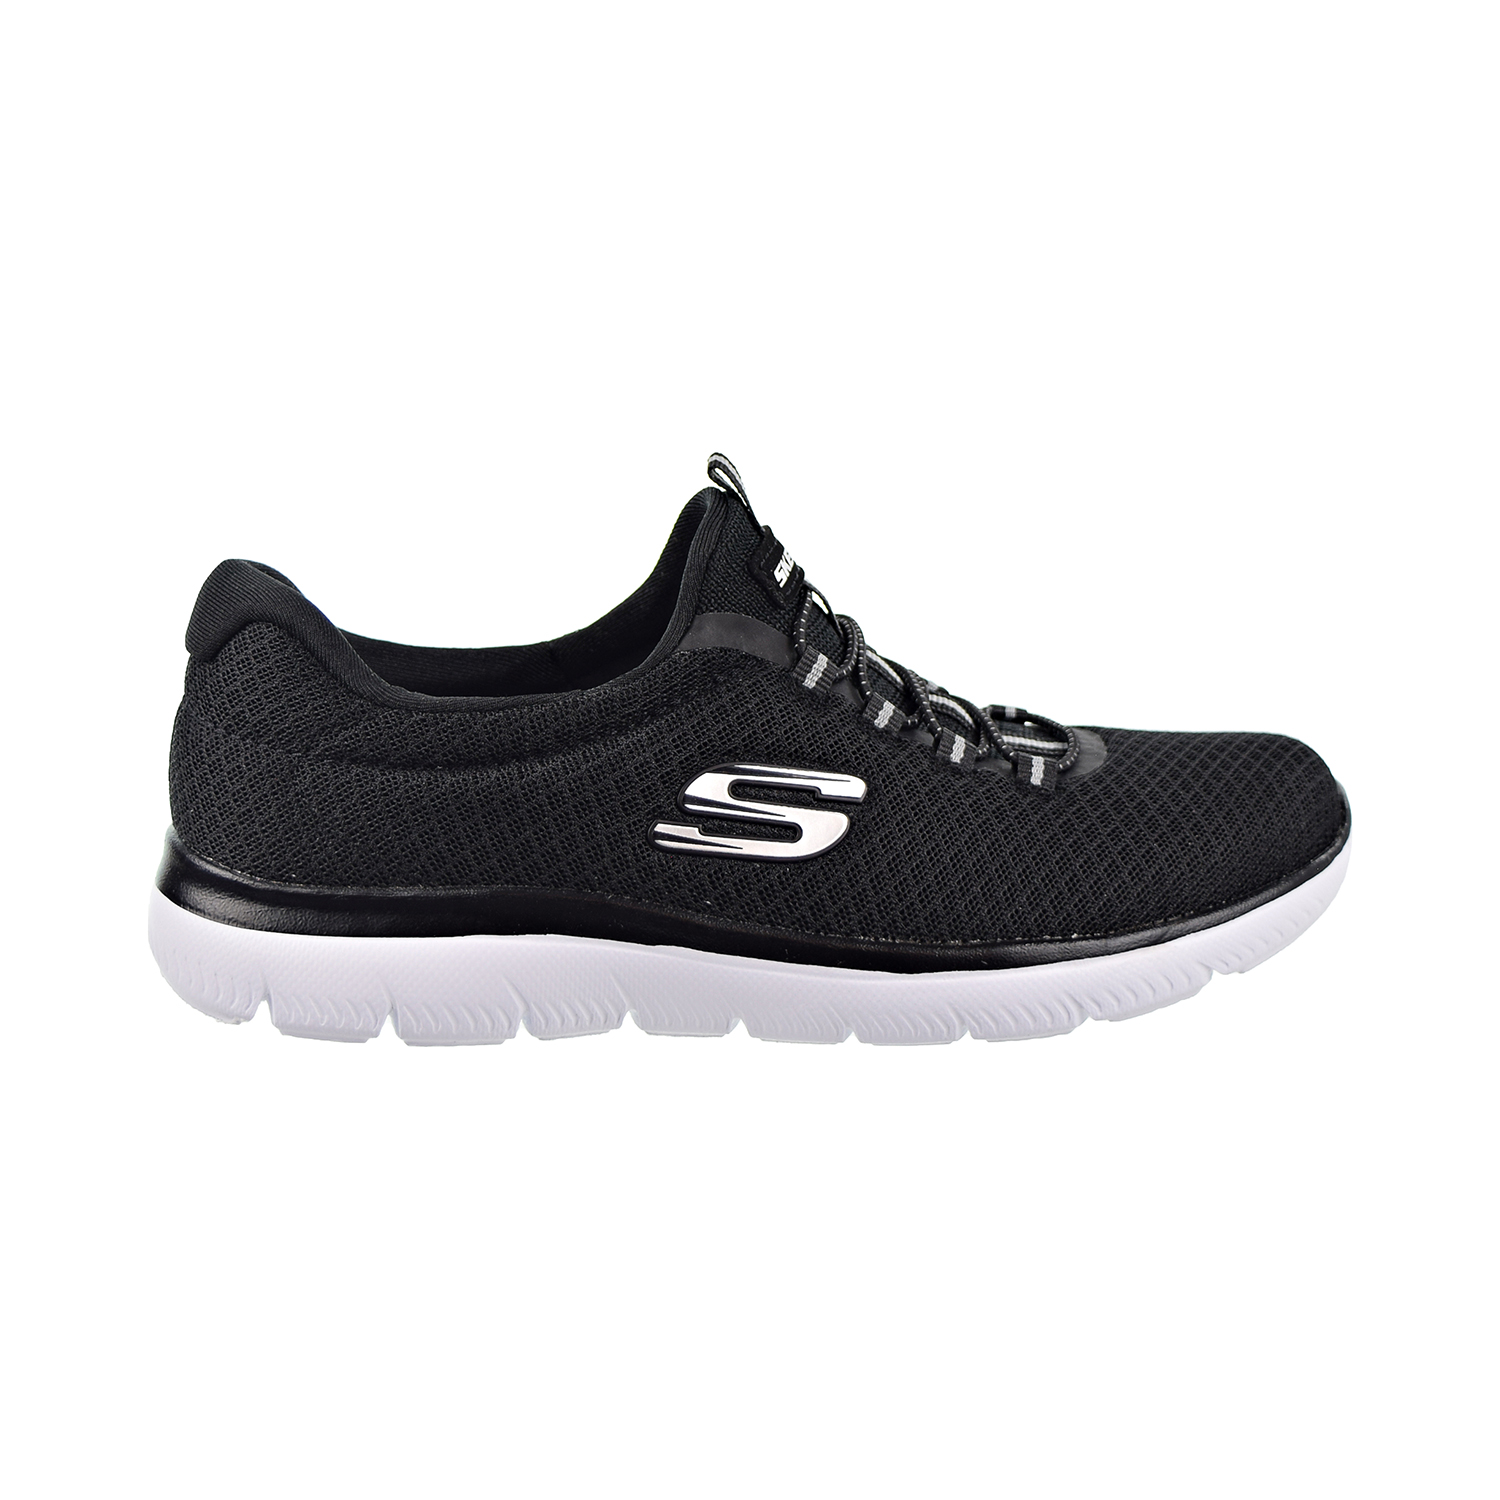 Gloomy index knot Skechers Summits Womens Shoes Black/White 12980-bkw